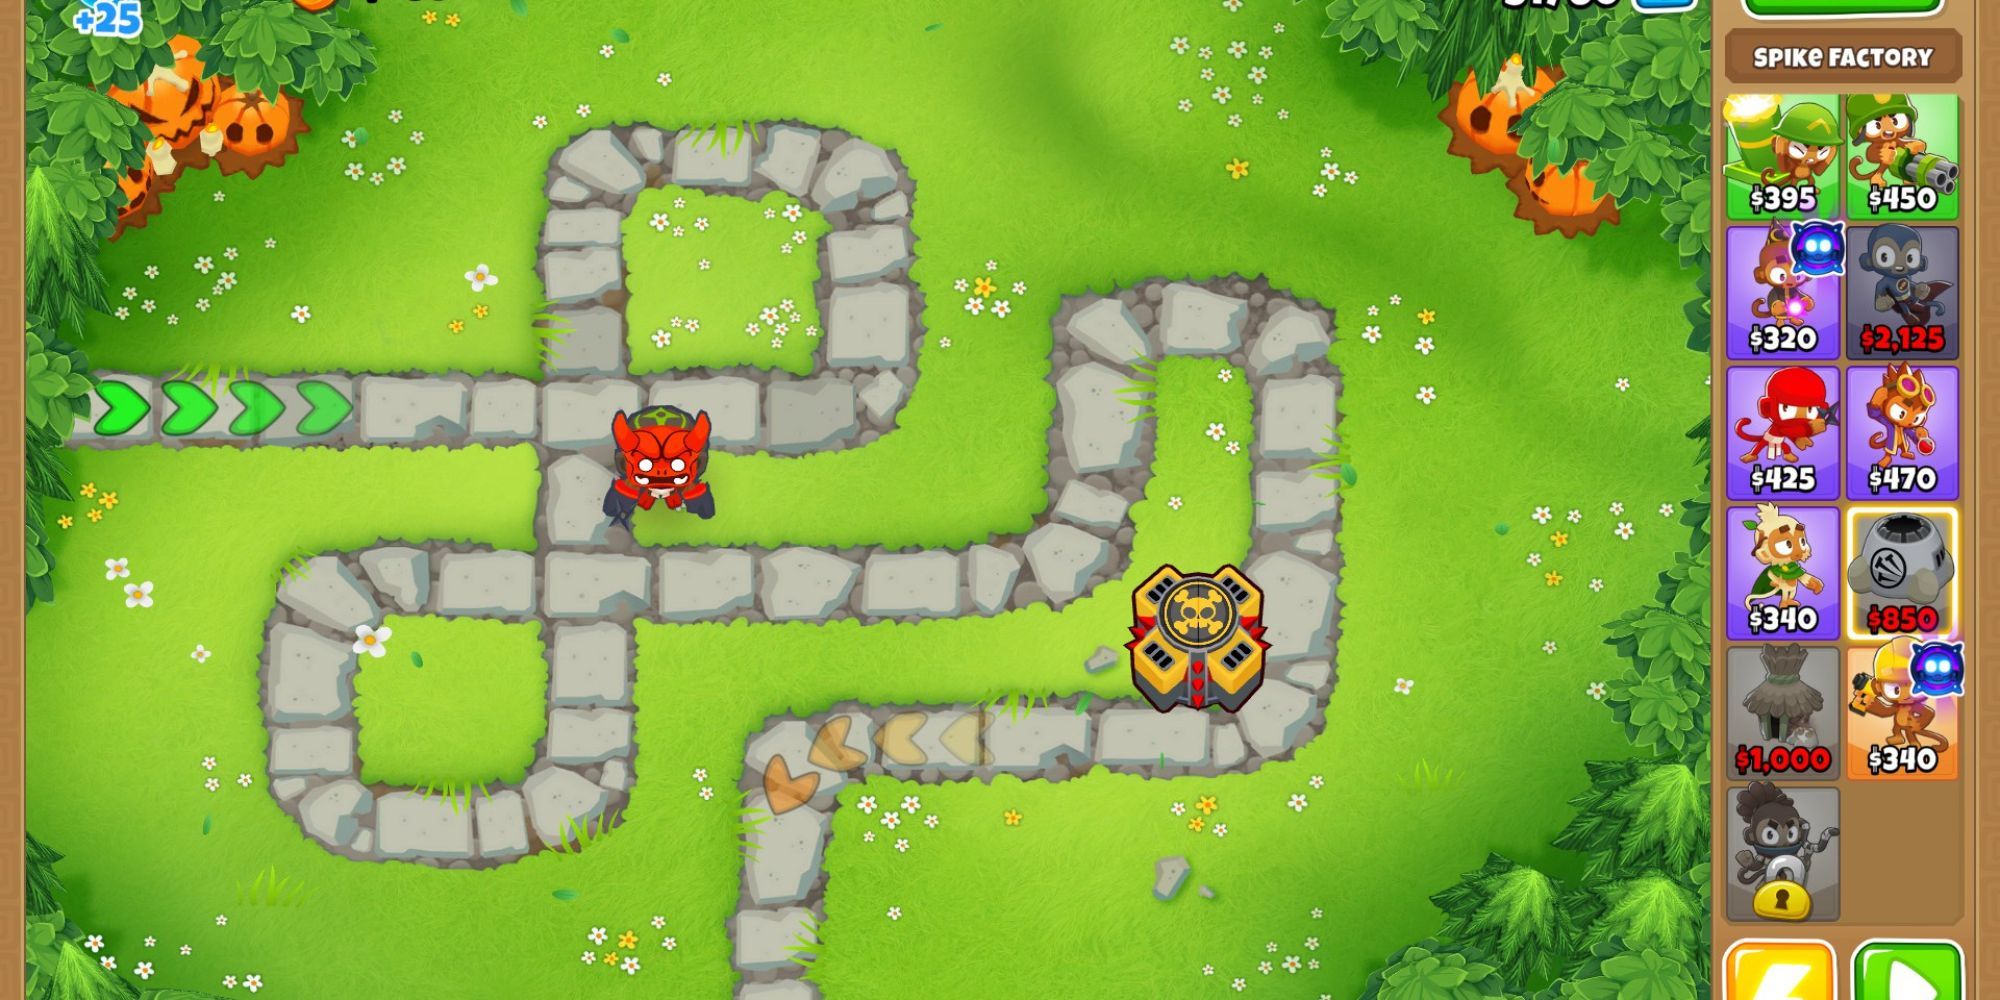 A grassy beginner map showing a red ninja monkey and a yellow tack shooter on Deflation mode.